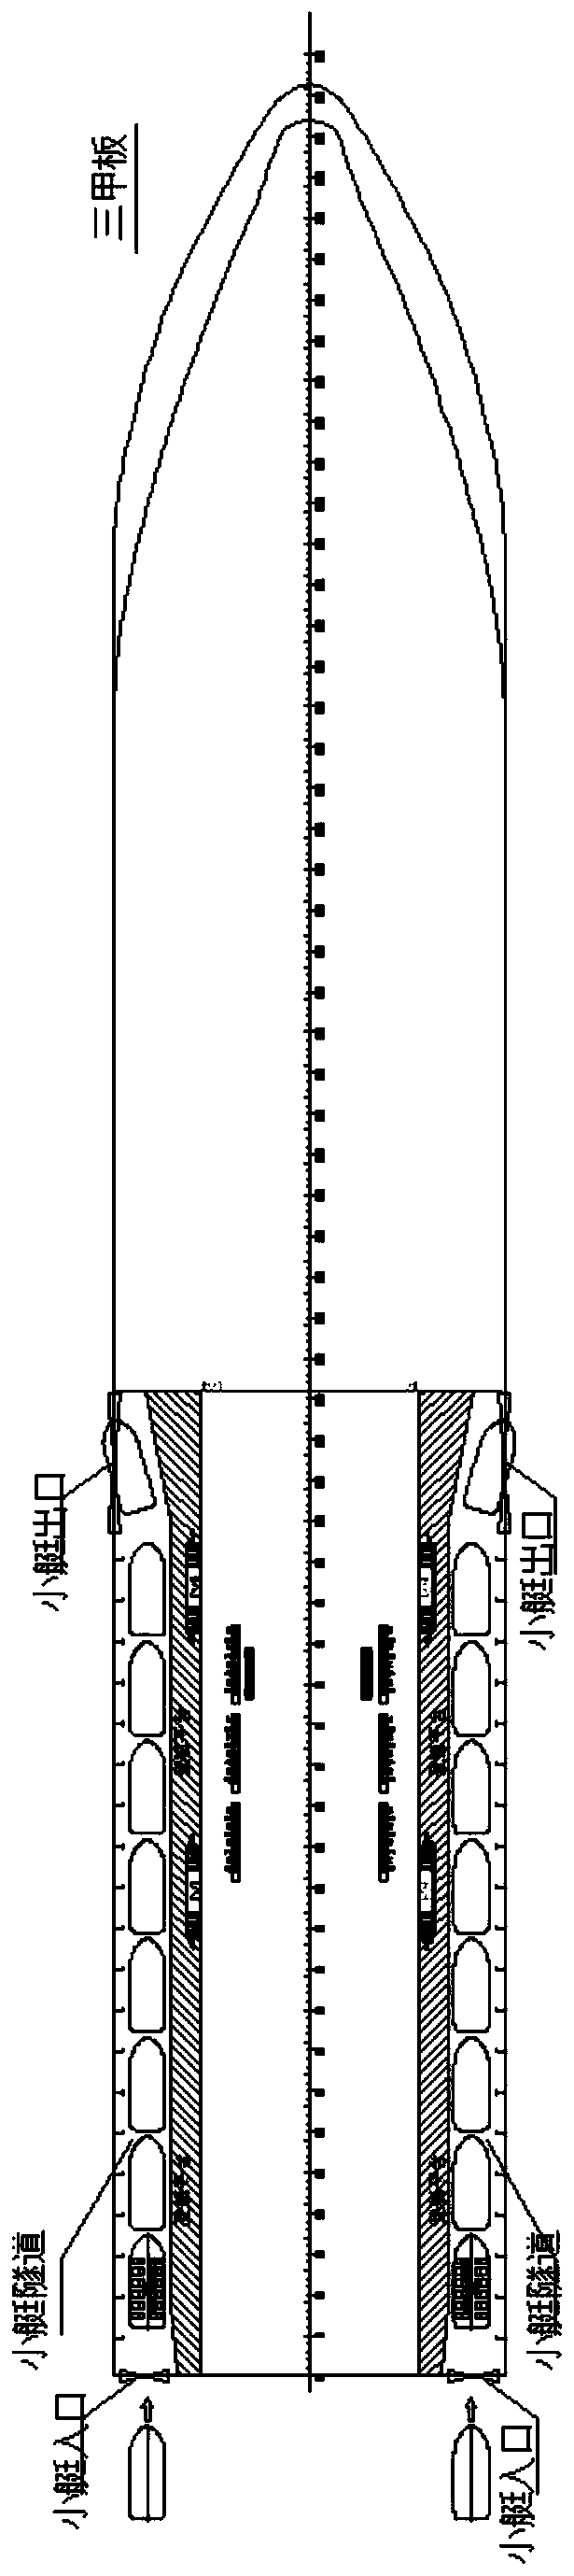 Docking method between passenger ship and small boat and method of boarding and disembarking